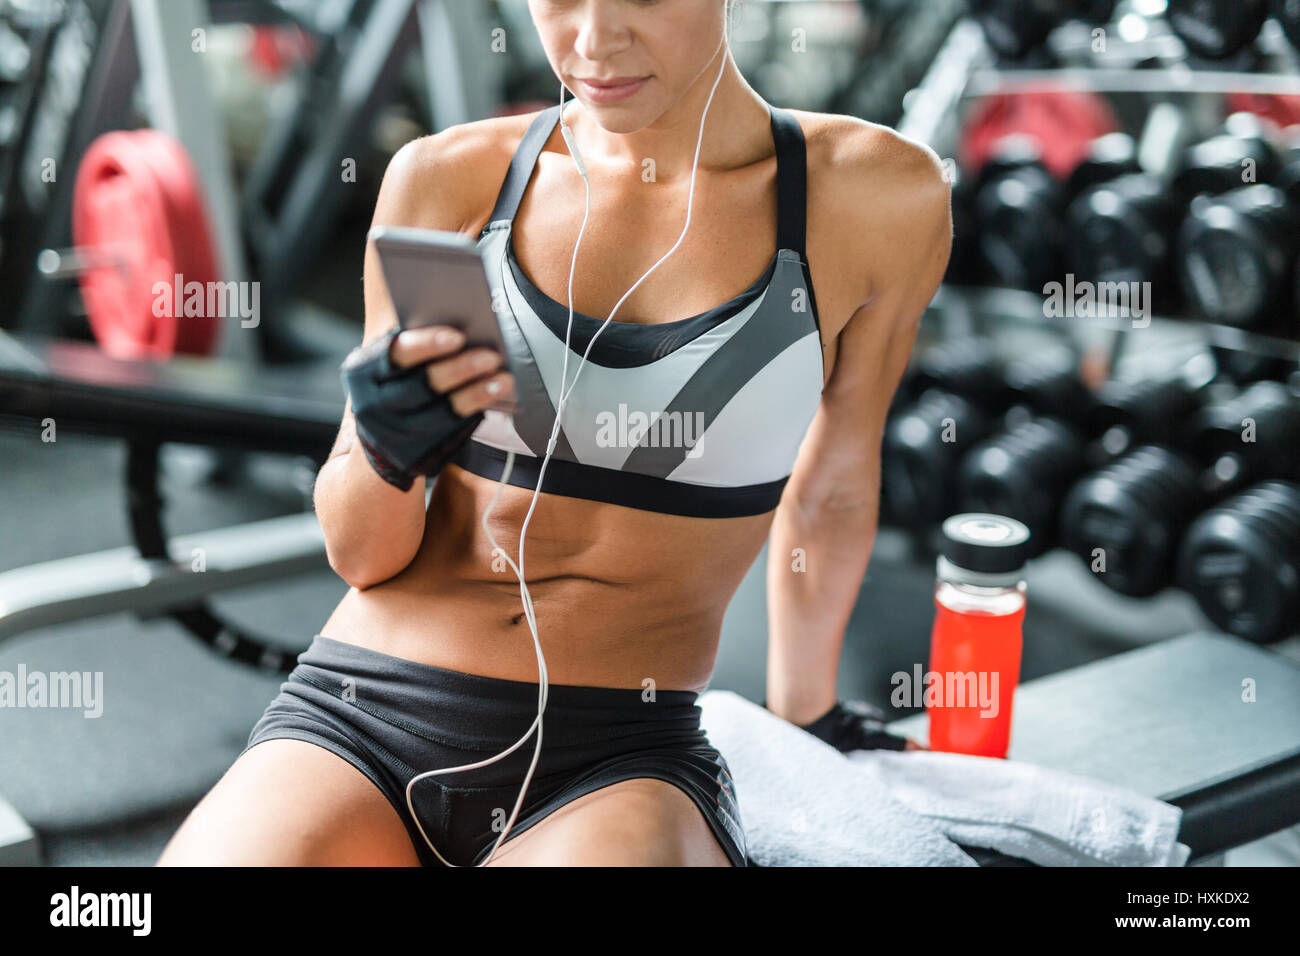 Workout Fitness Meaning Getting Fit And Training Stock Photo, Picture and  Royalty Free Image. Image 63921244.